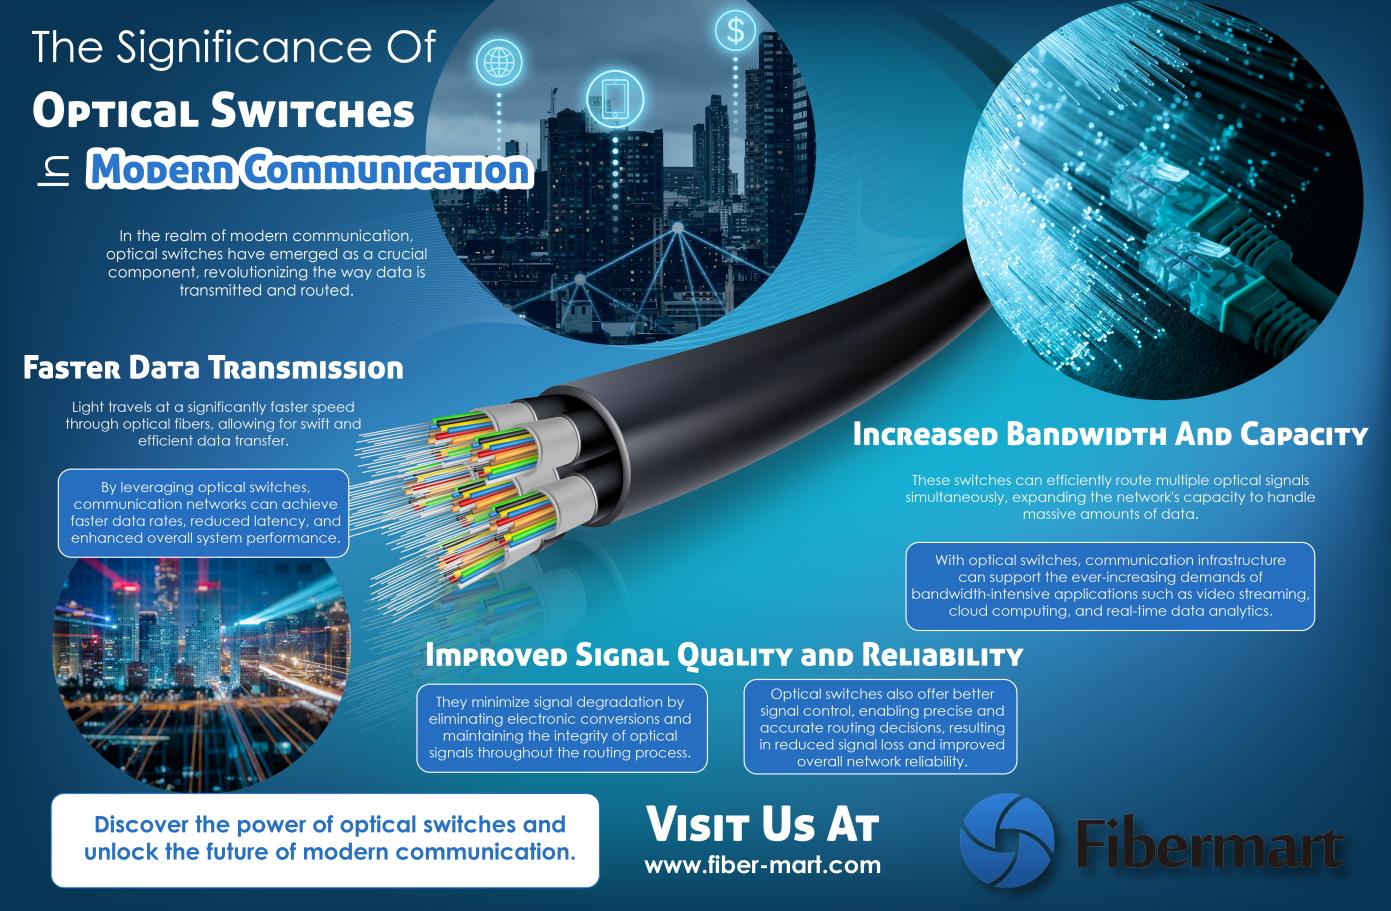 The Significance Of Optical Switches in Modern Communication